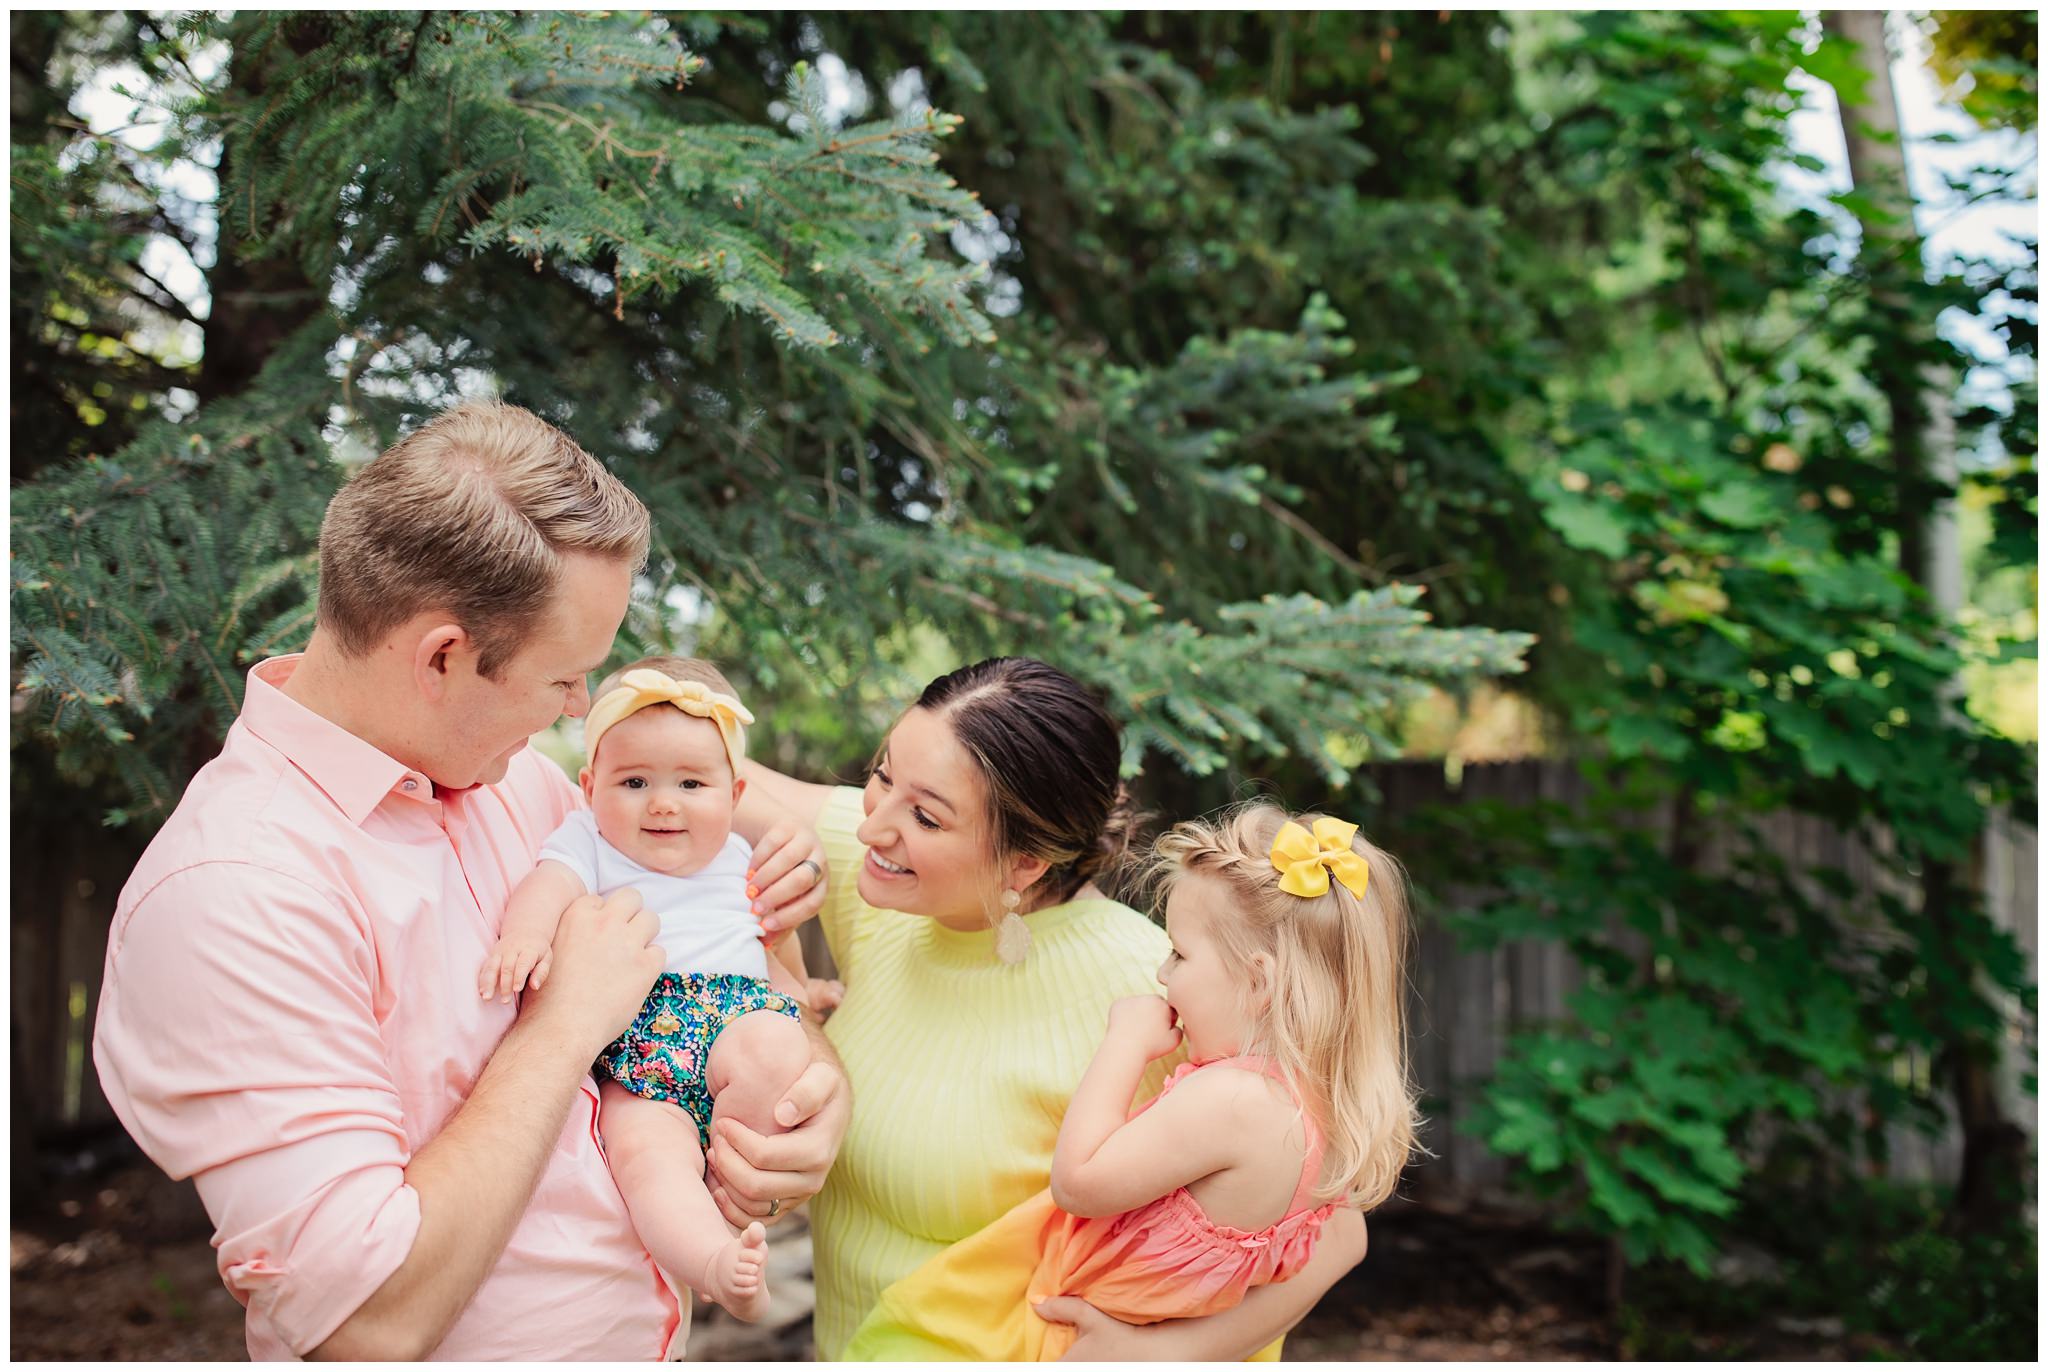 Family laughing together during their backyard family session